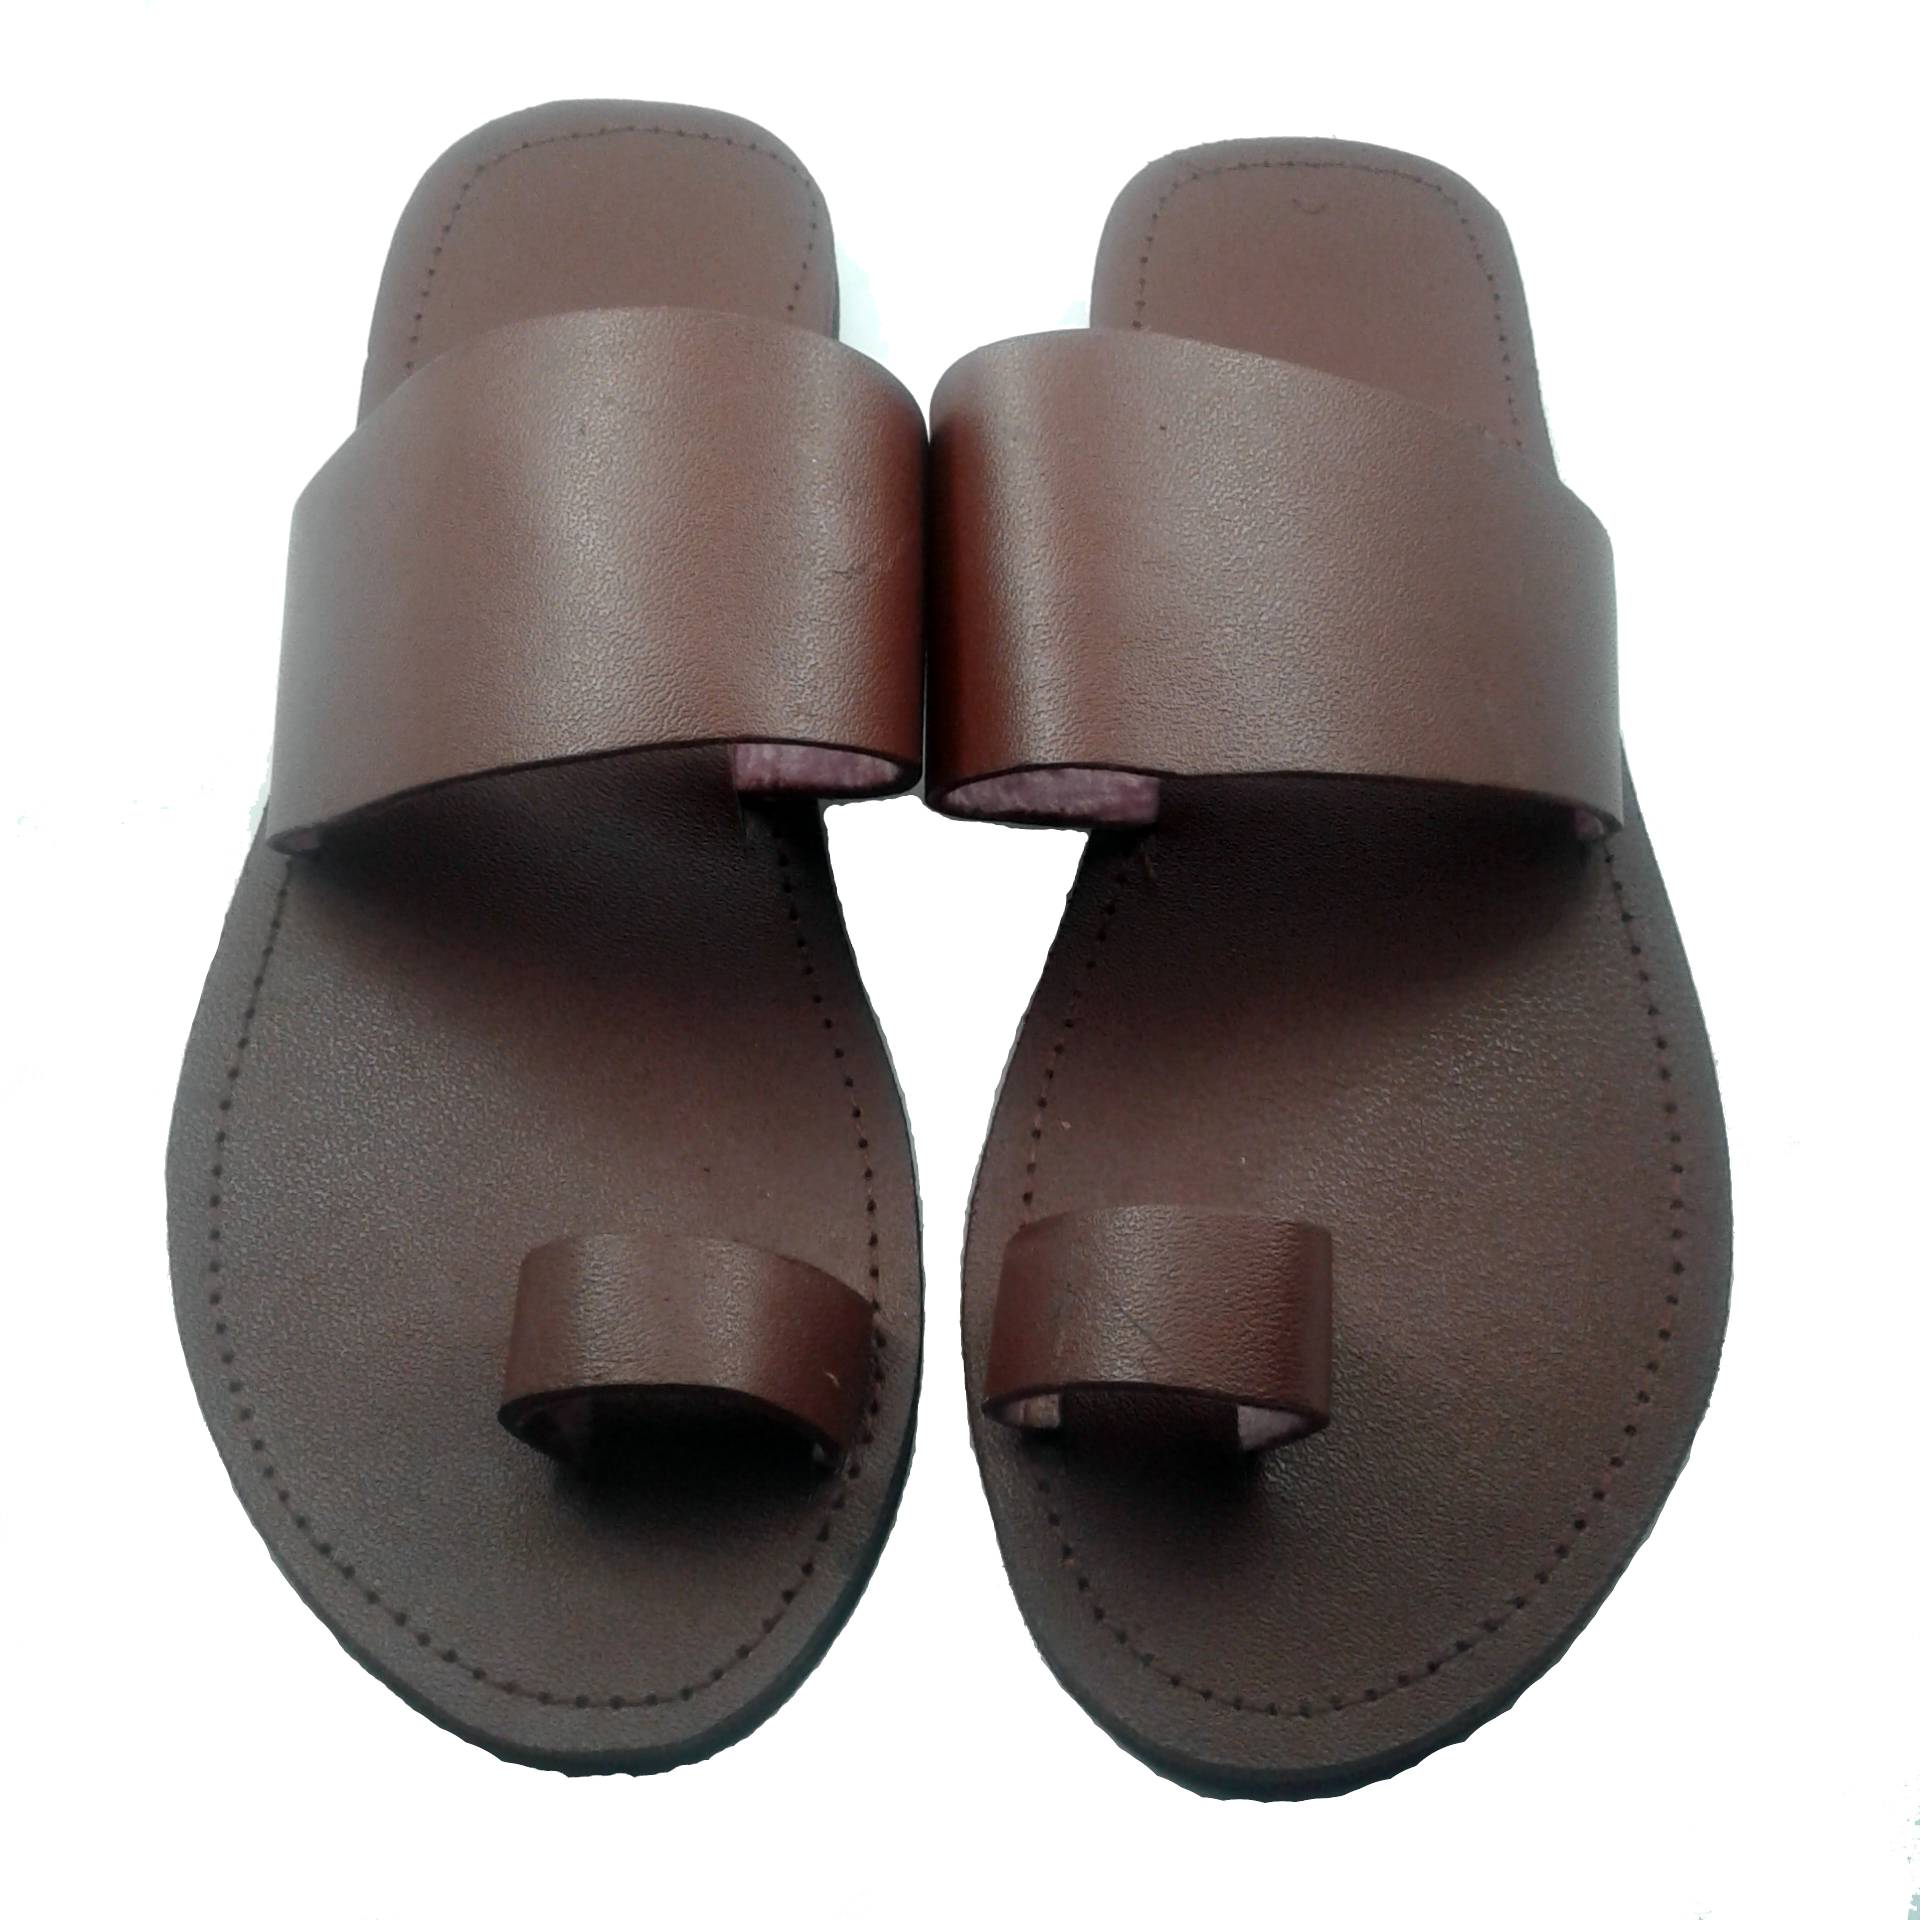 leather toe ring sandals